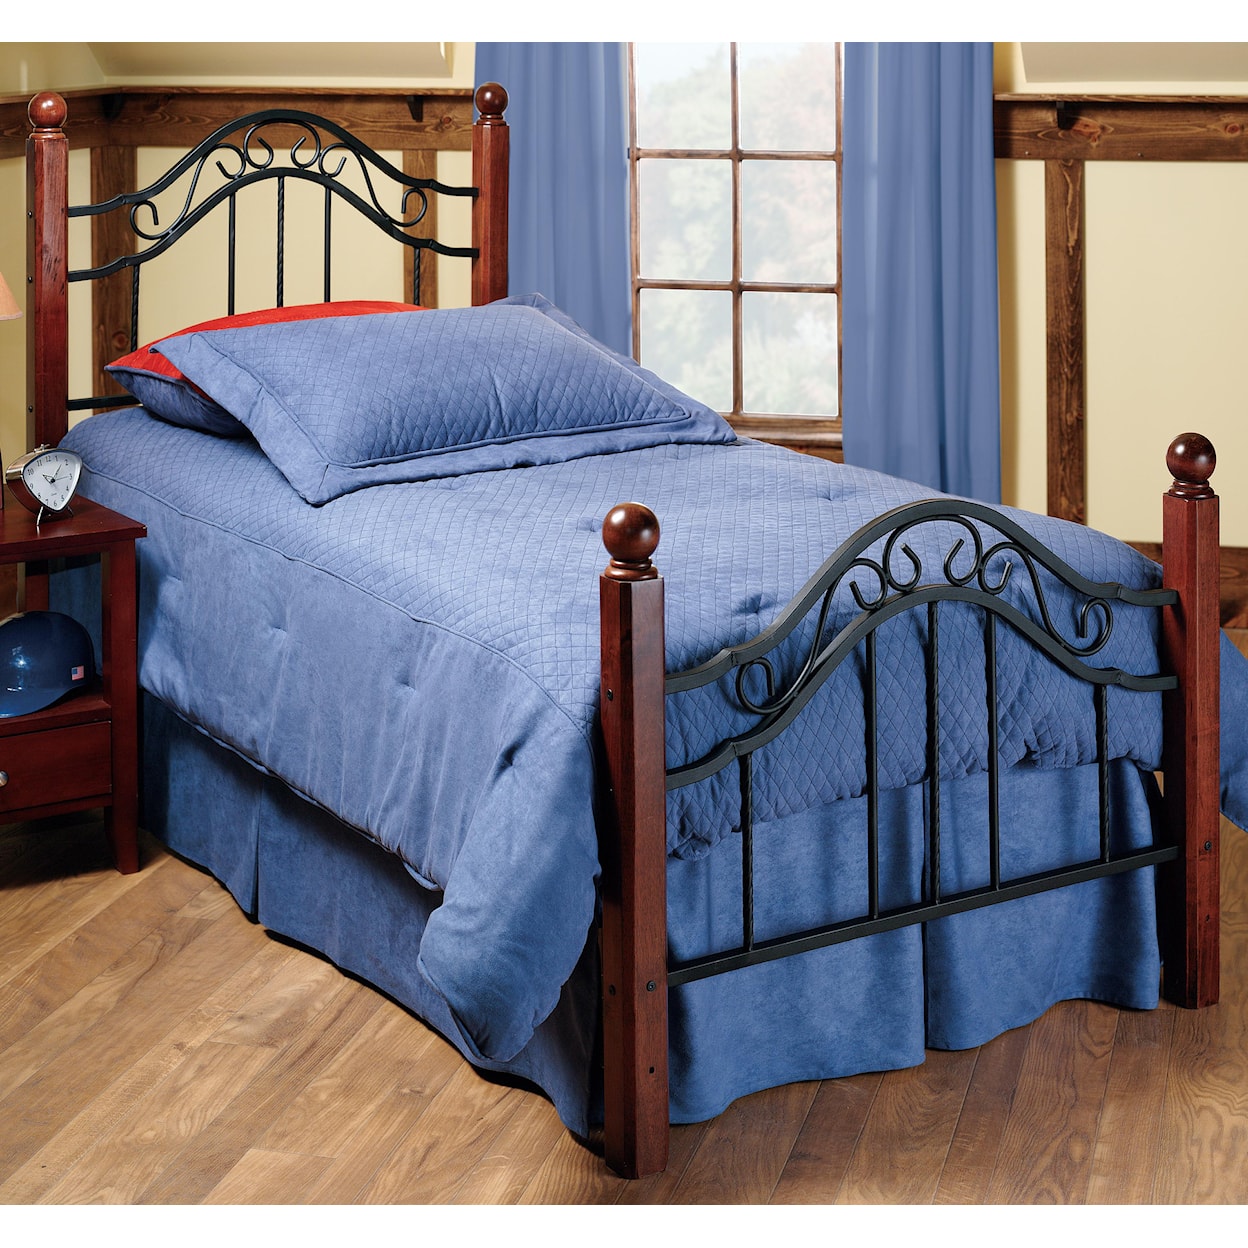 Hillsdale Metal Beds Queen Madison Bed